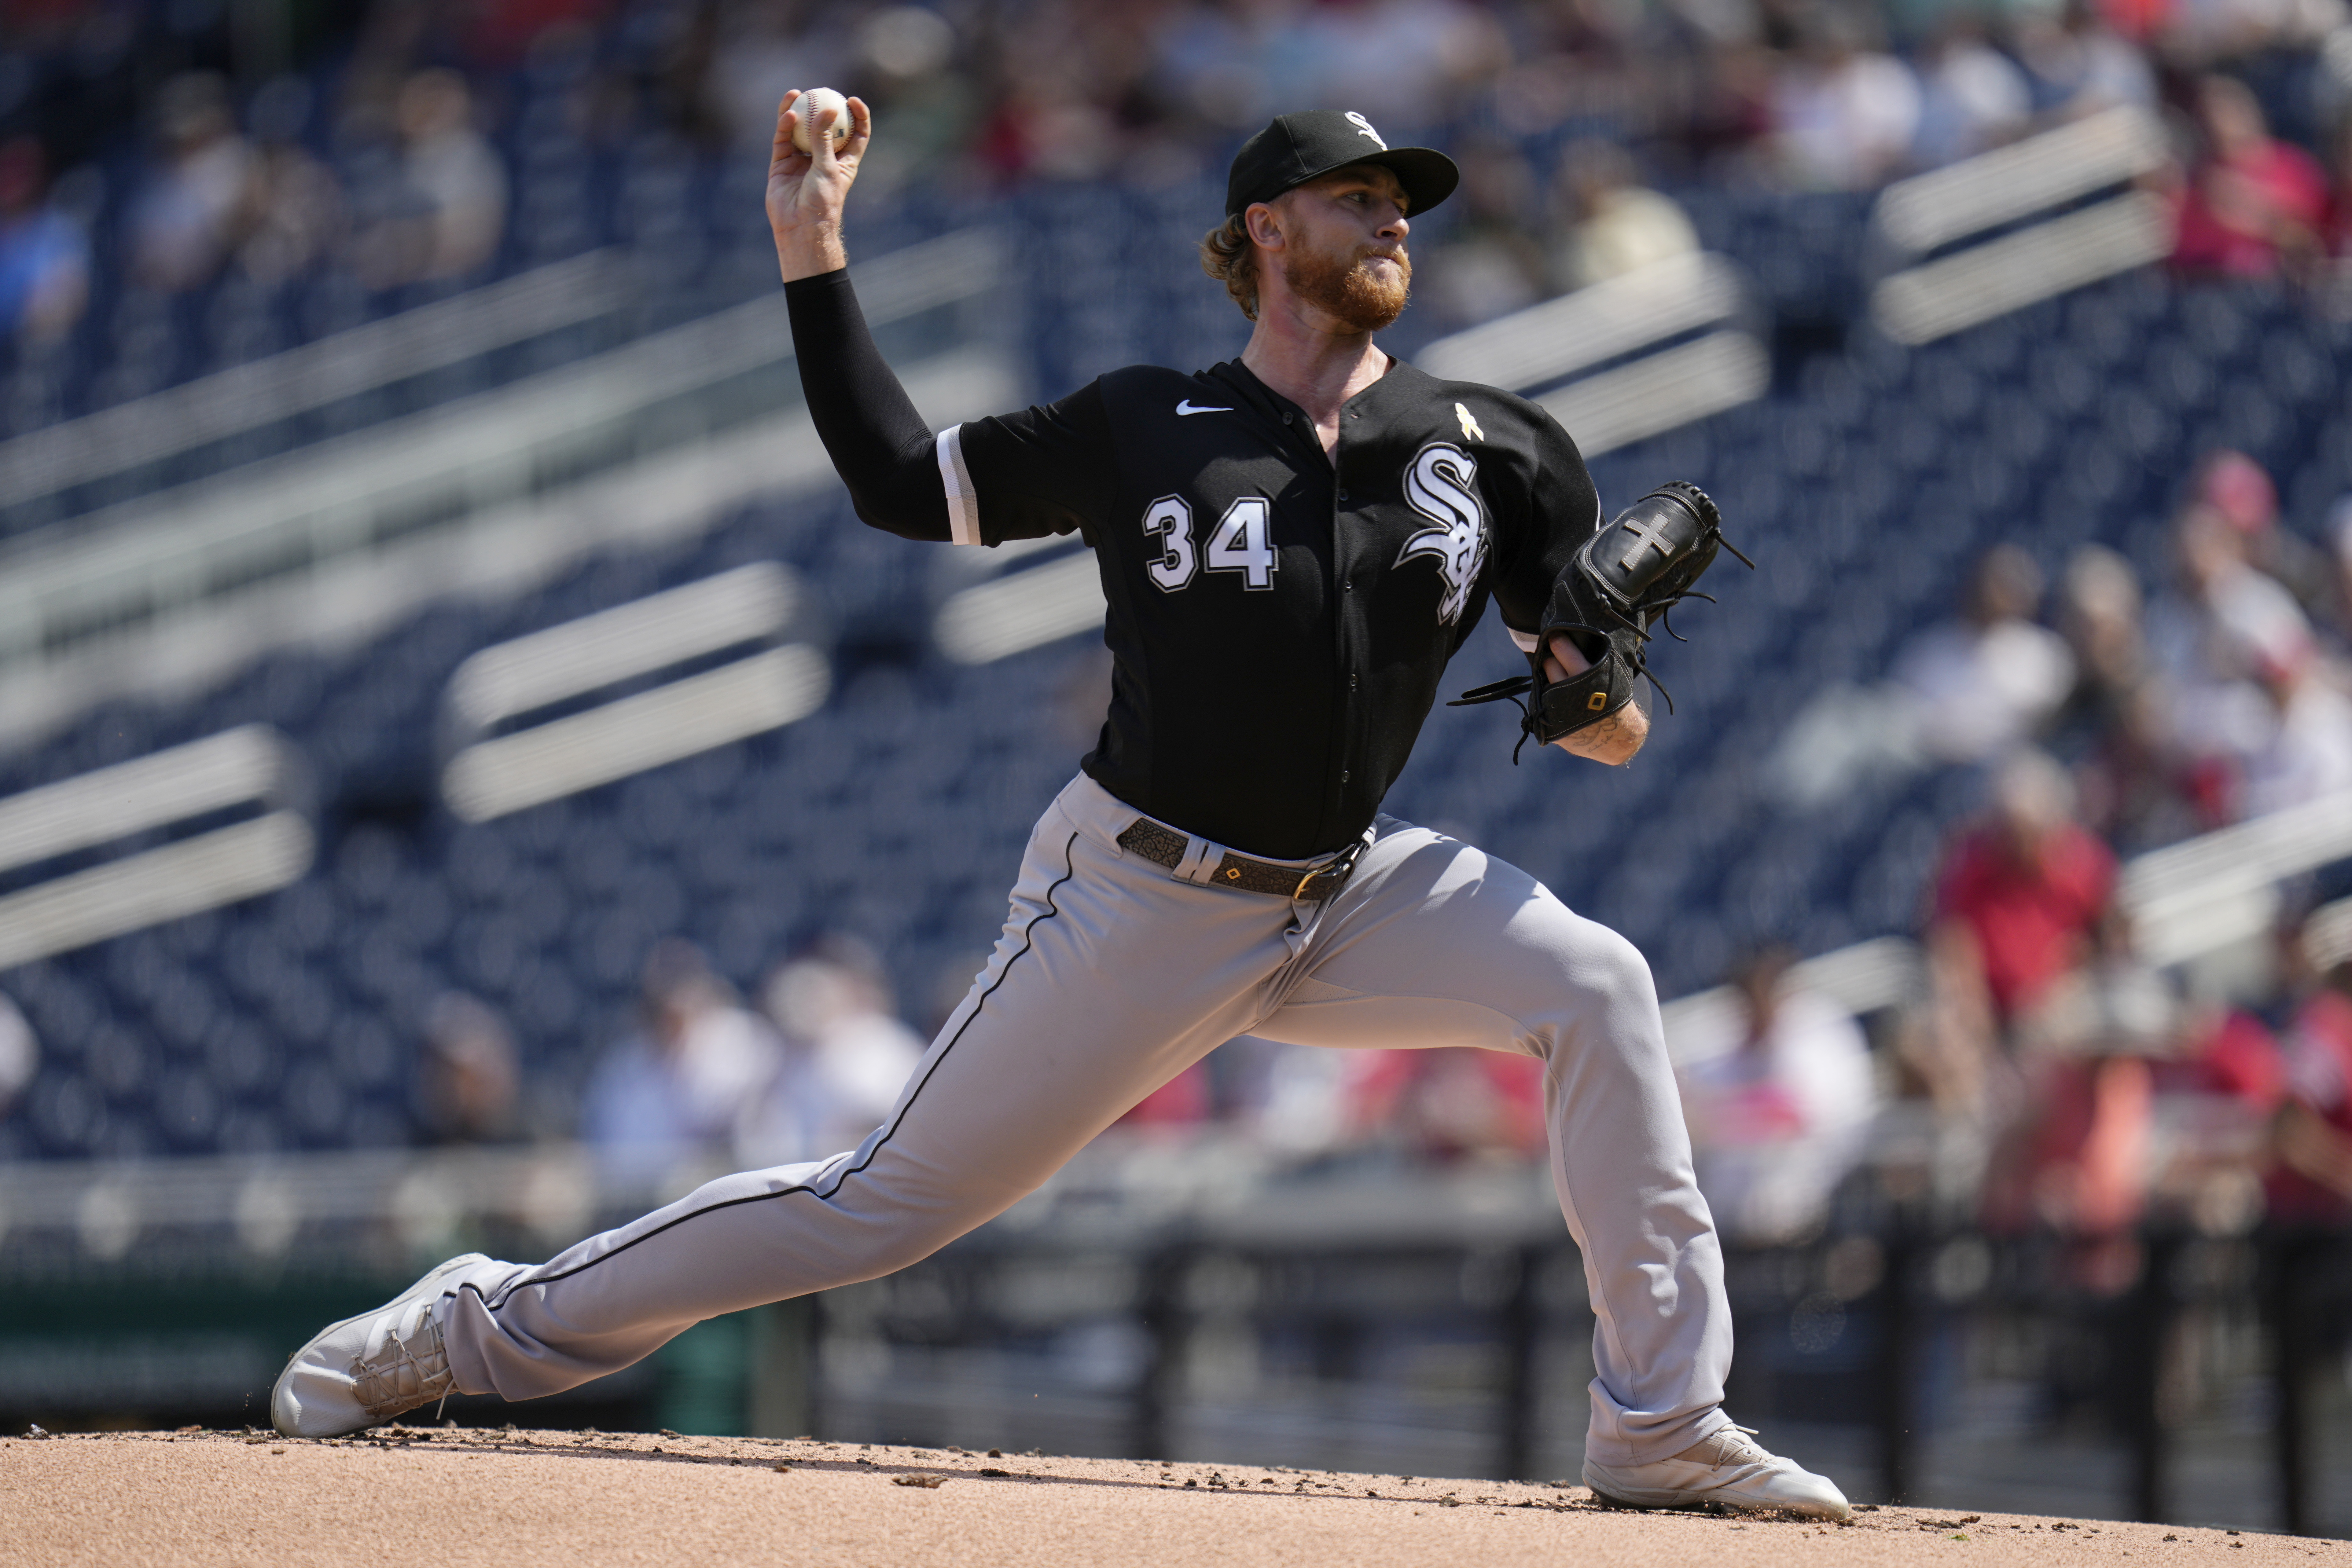 Michael Kopech again starts spring working back from injury, but